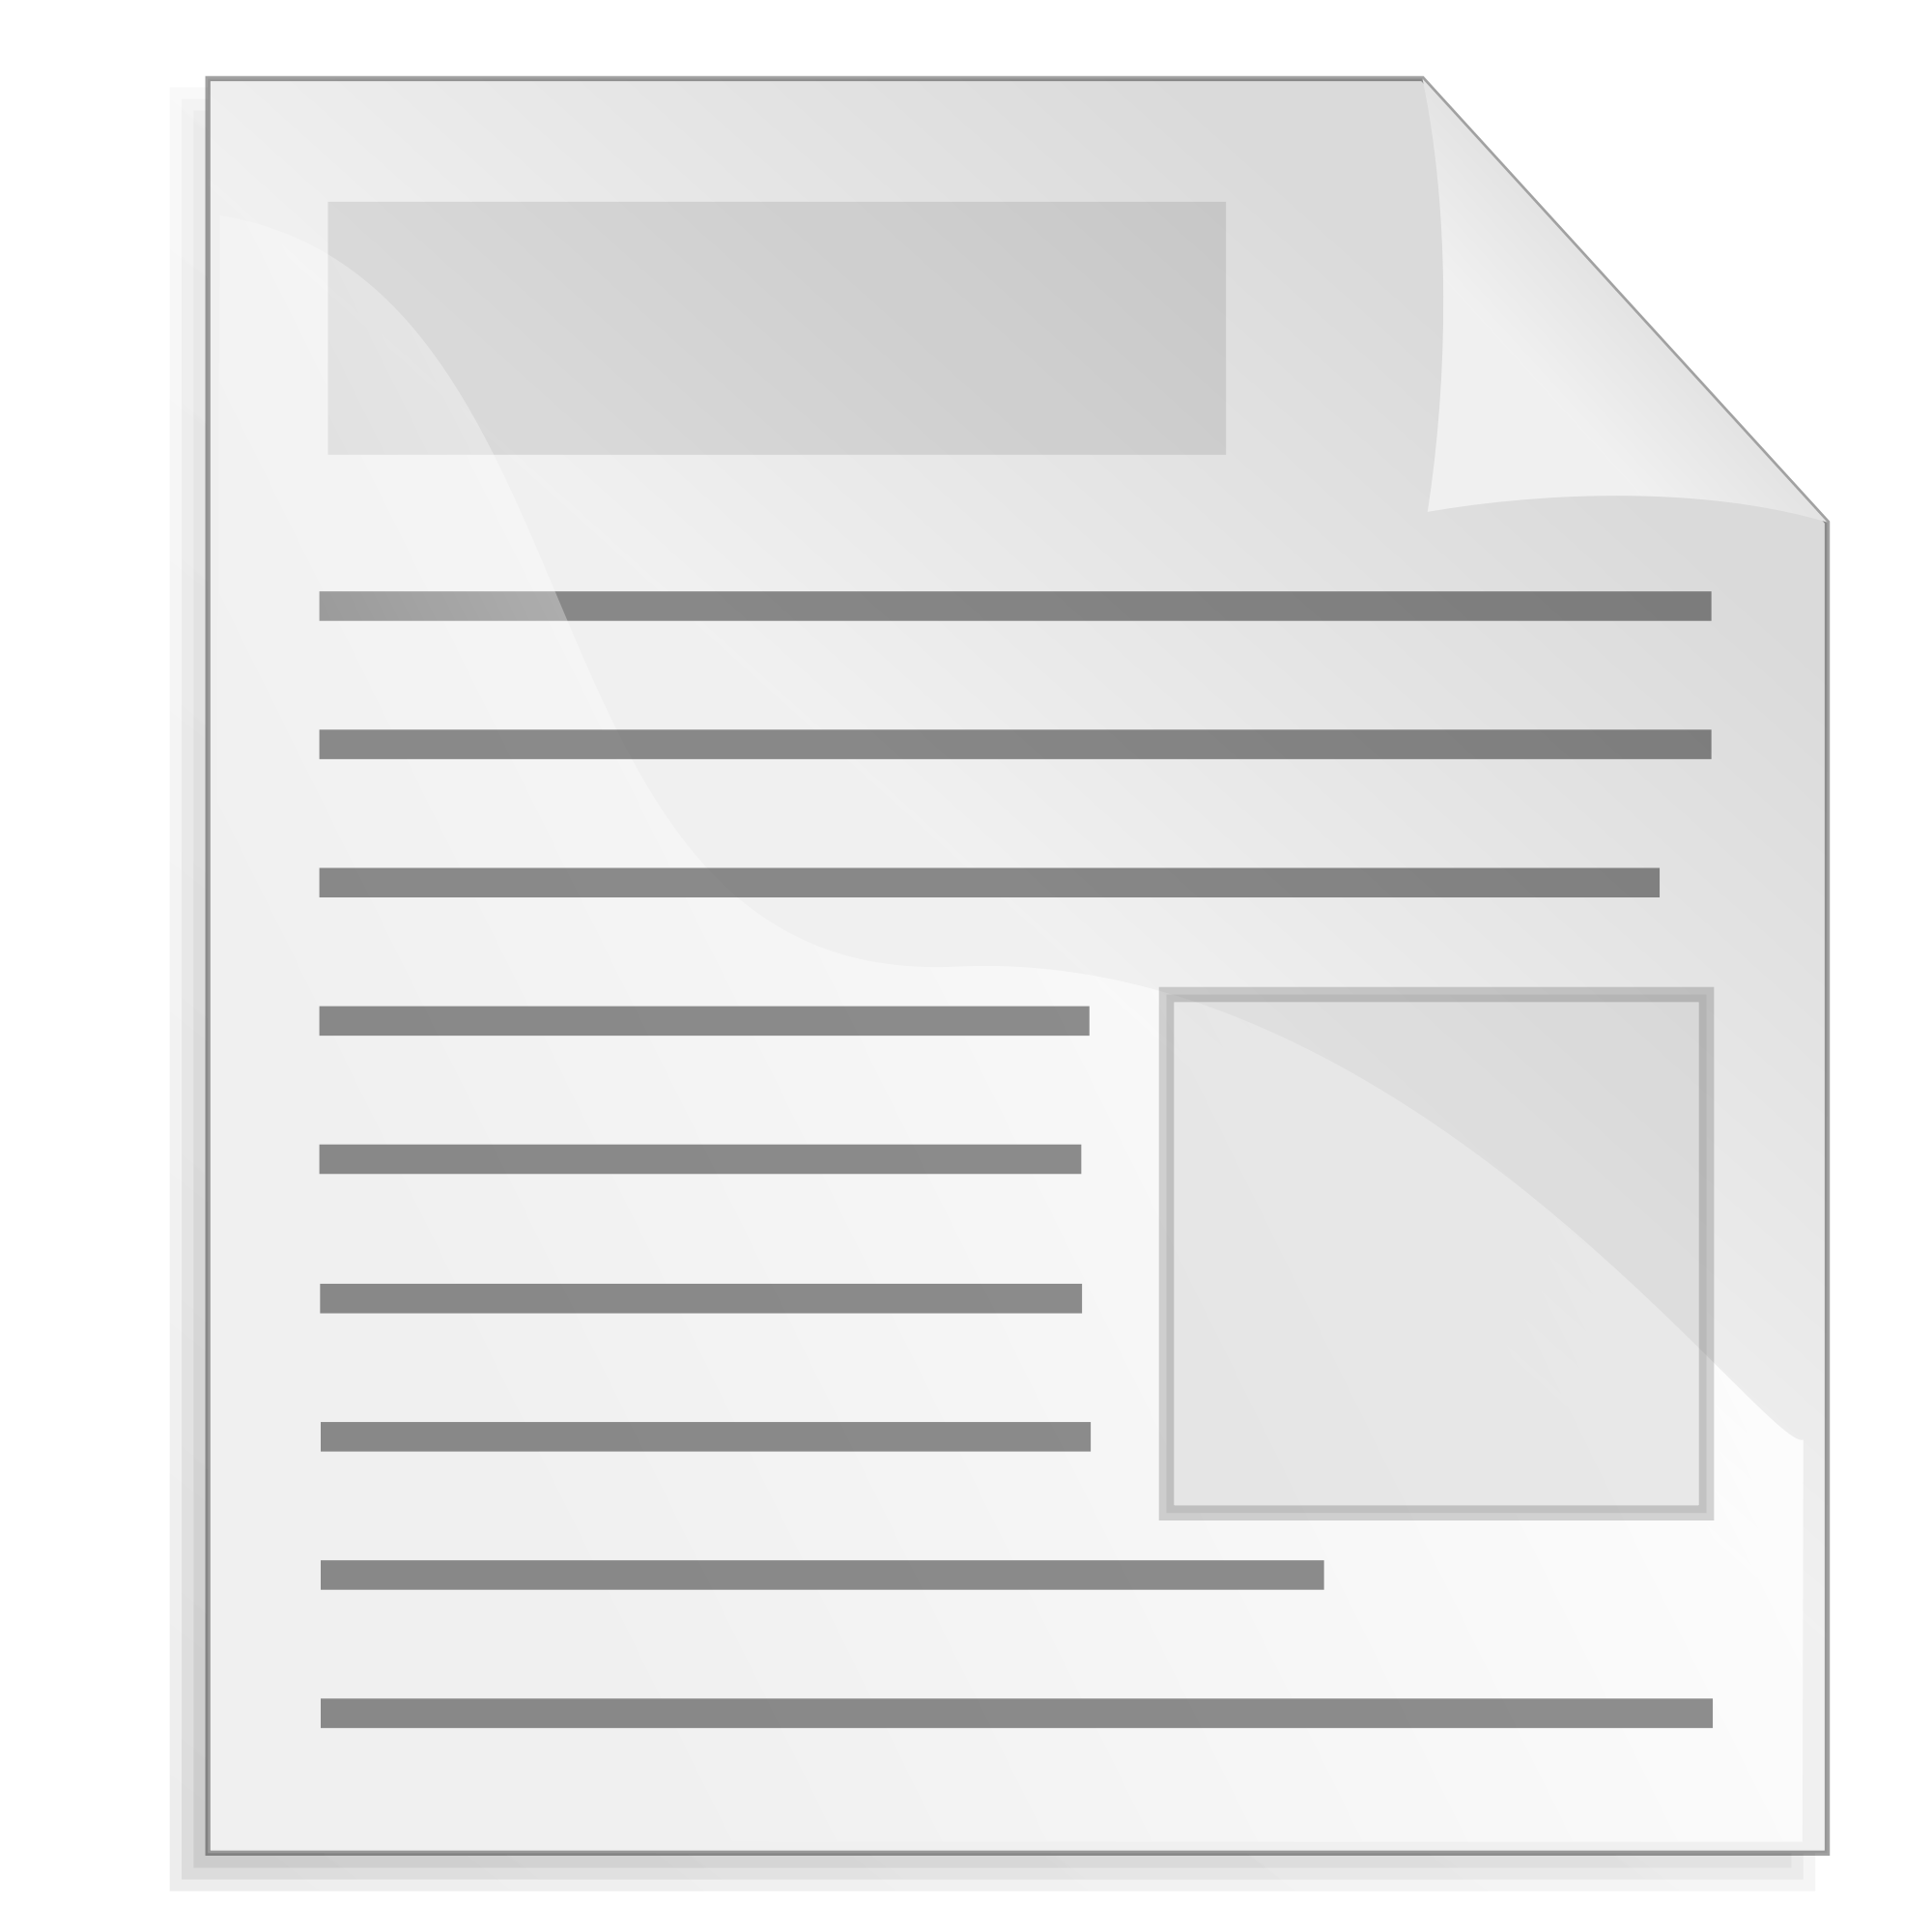 document clipart file